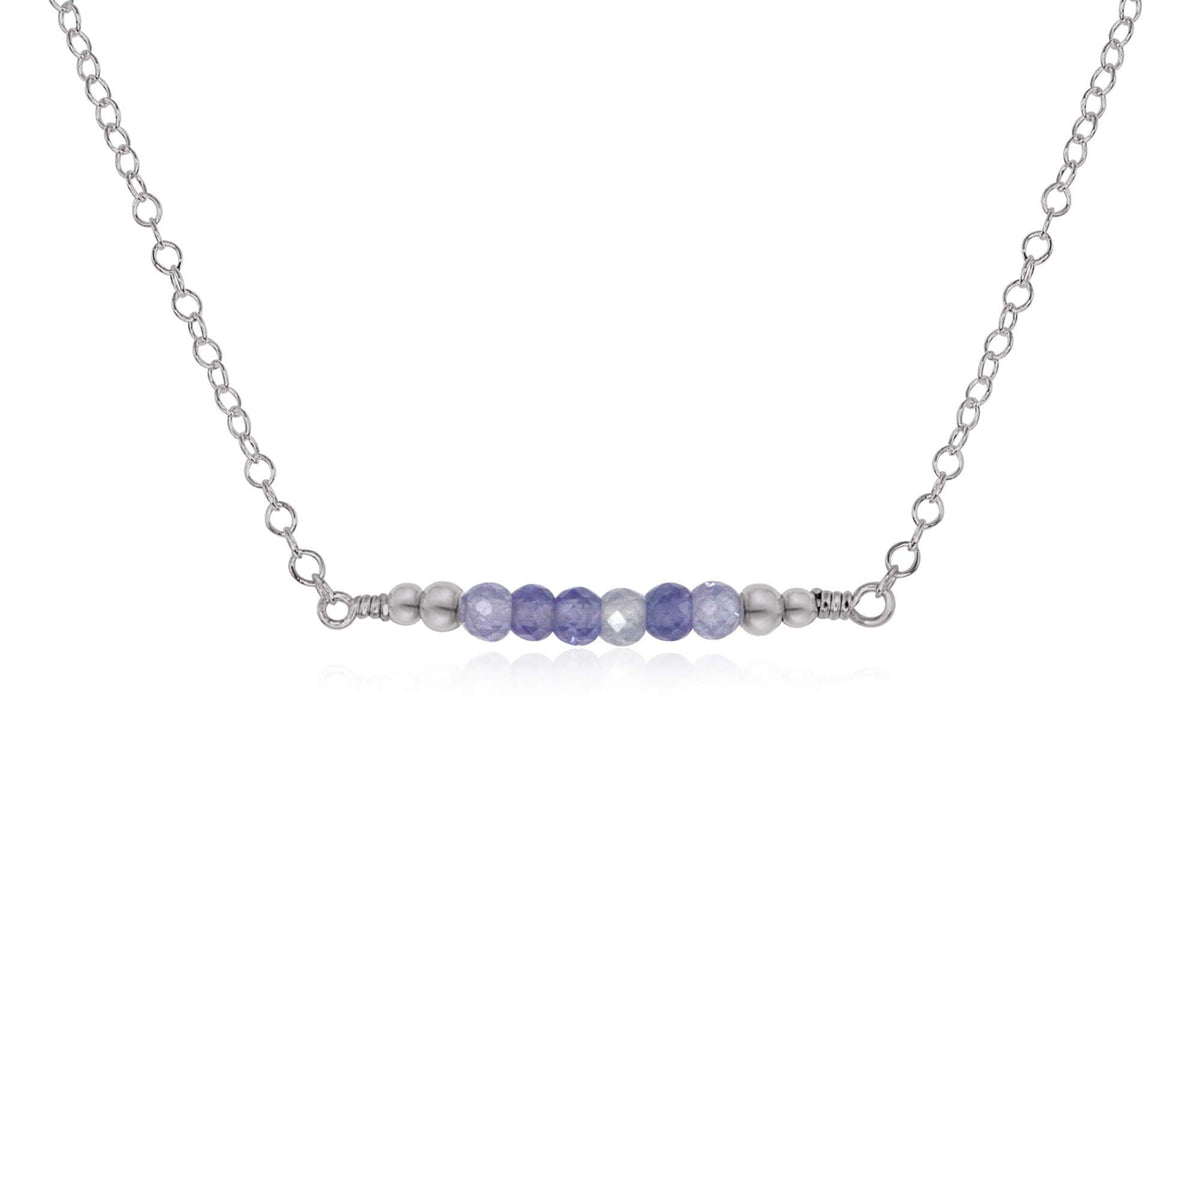 Faceted Bead Bar Necklace - Tanzanite - Stainless Steel - Luna Tide Handmade Jewellery